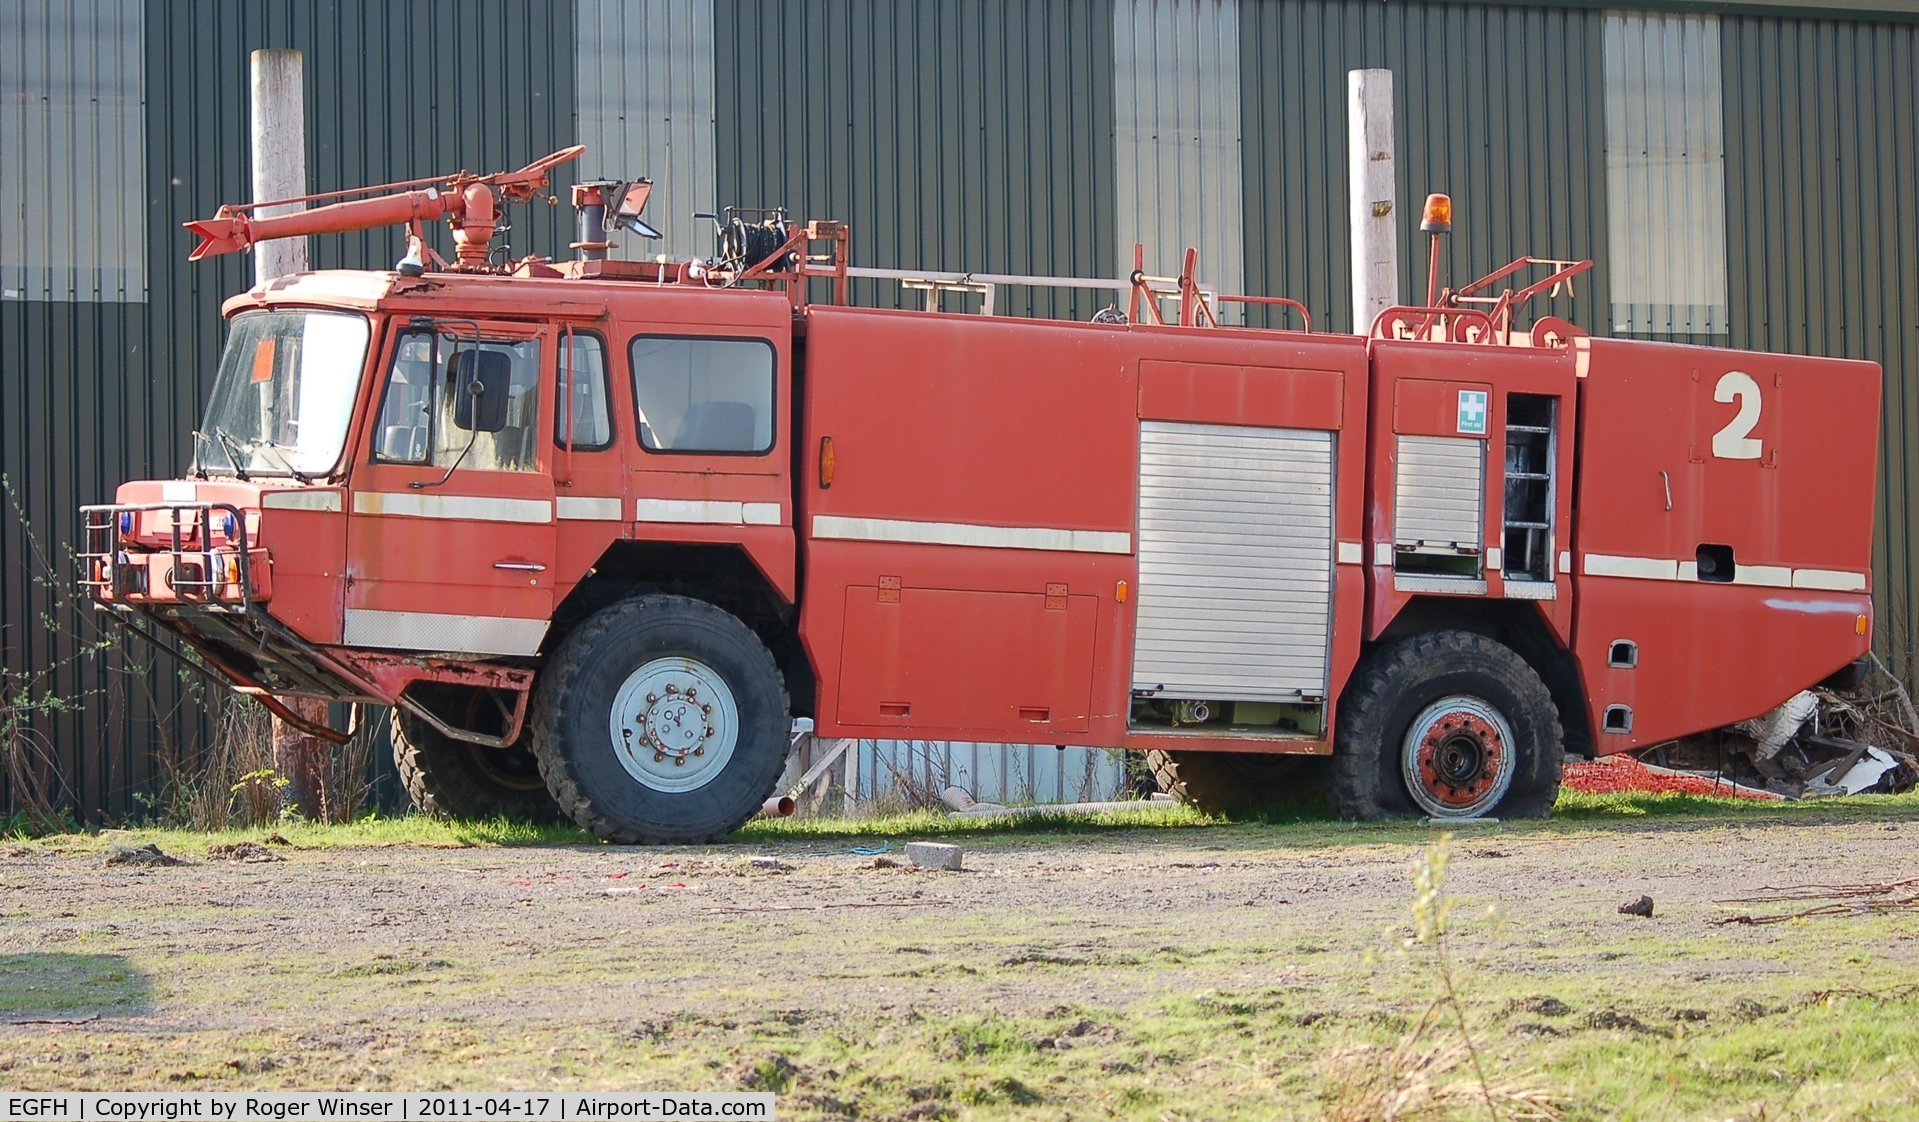 Swansea Airport, Swansea, Wales United Kingdom (EGFH) - No longer in service, fire and rescue tender FIRE 2.